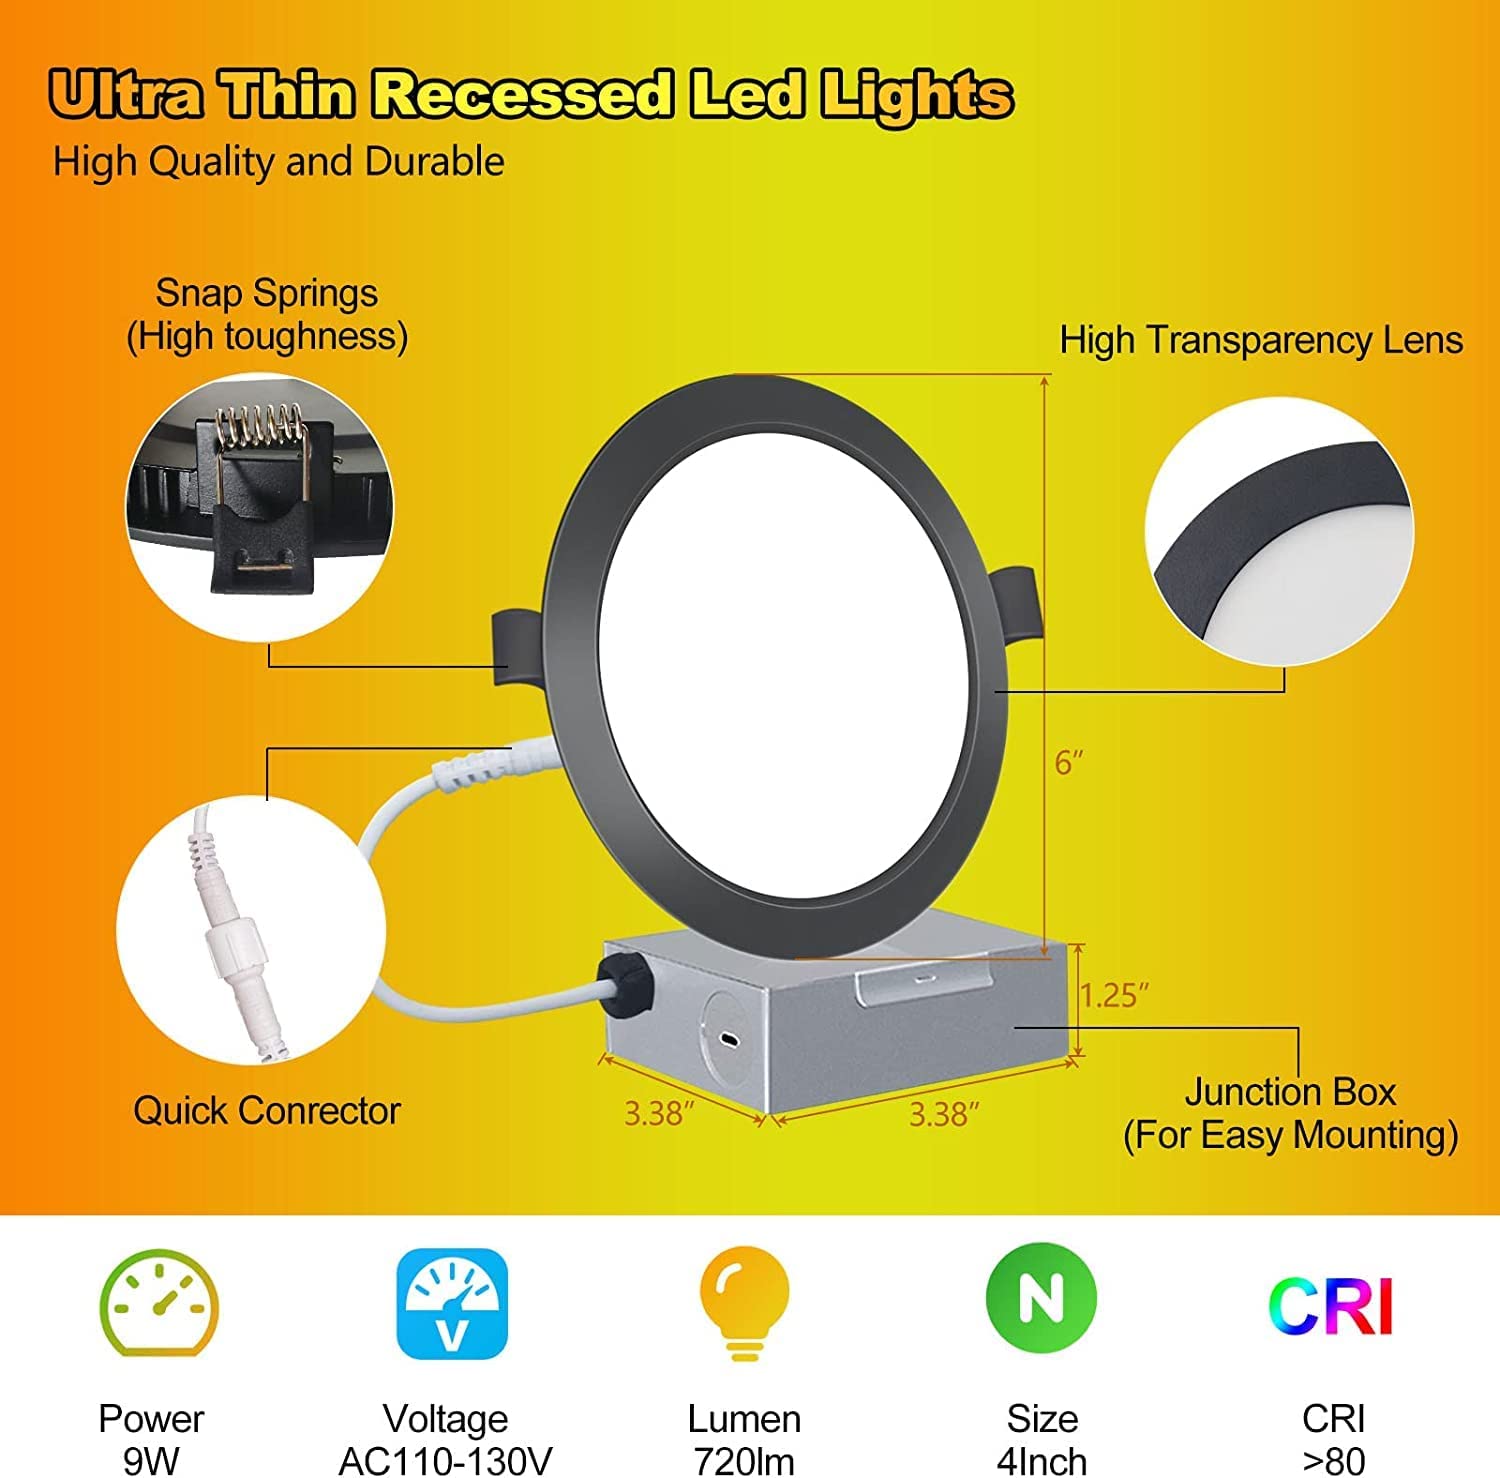 AIJIA Smart LED Recessed Lighting 6 inch, 13W 1040LM Smart Downlight with Junction Box, Recessed Light Fixtures with Alexa/Google Assistant (4 Pack)